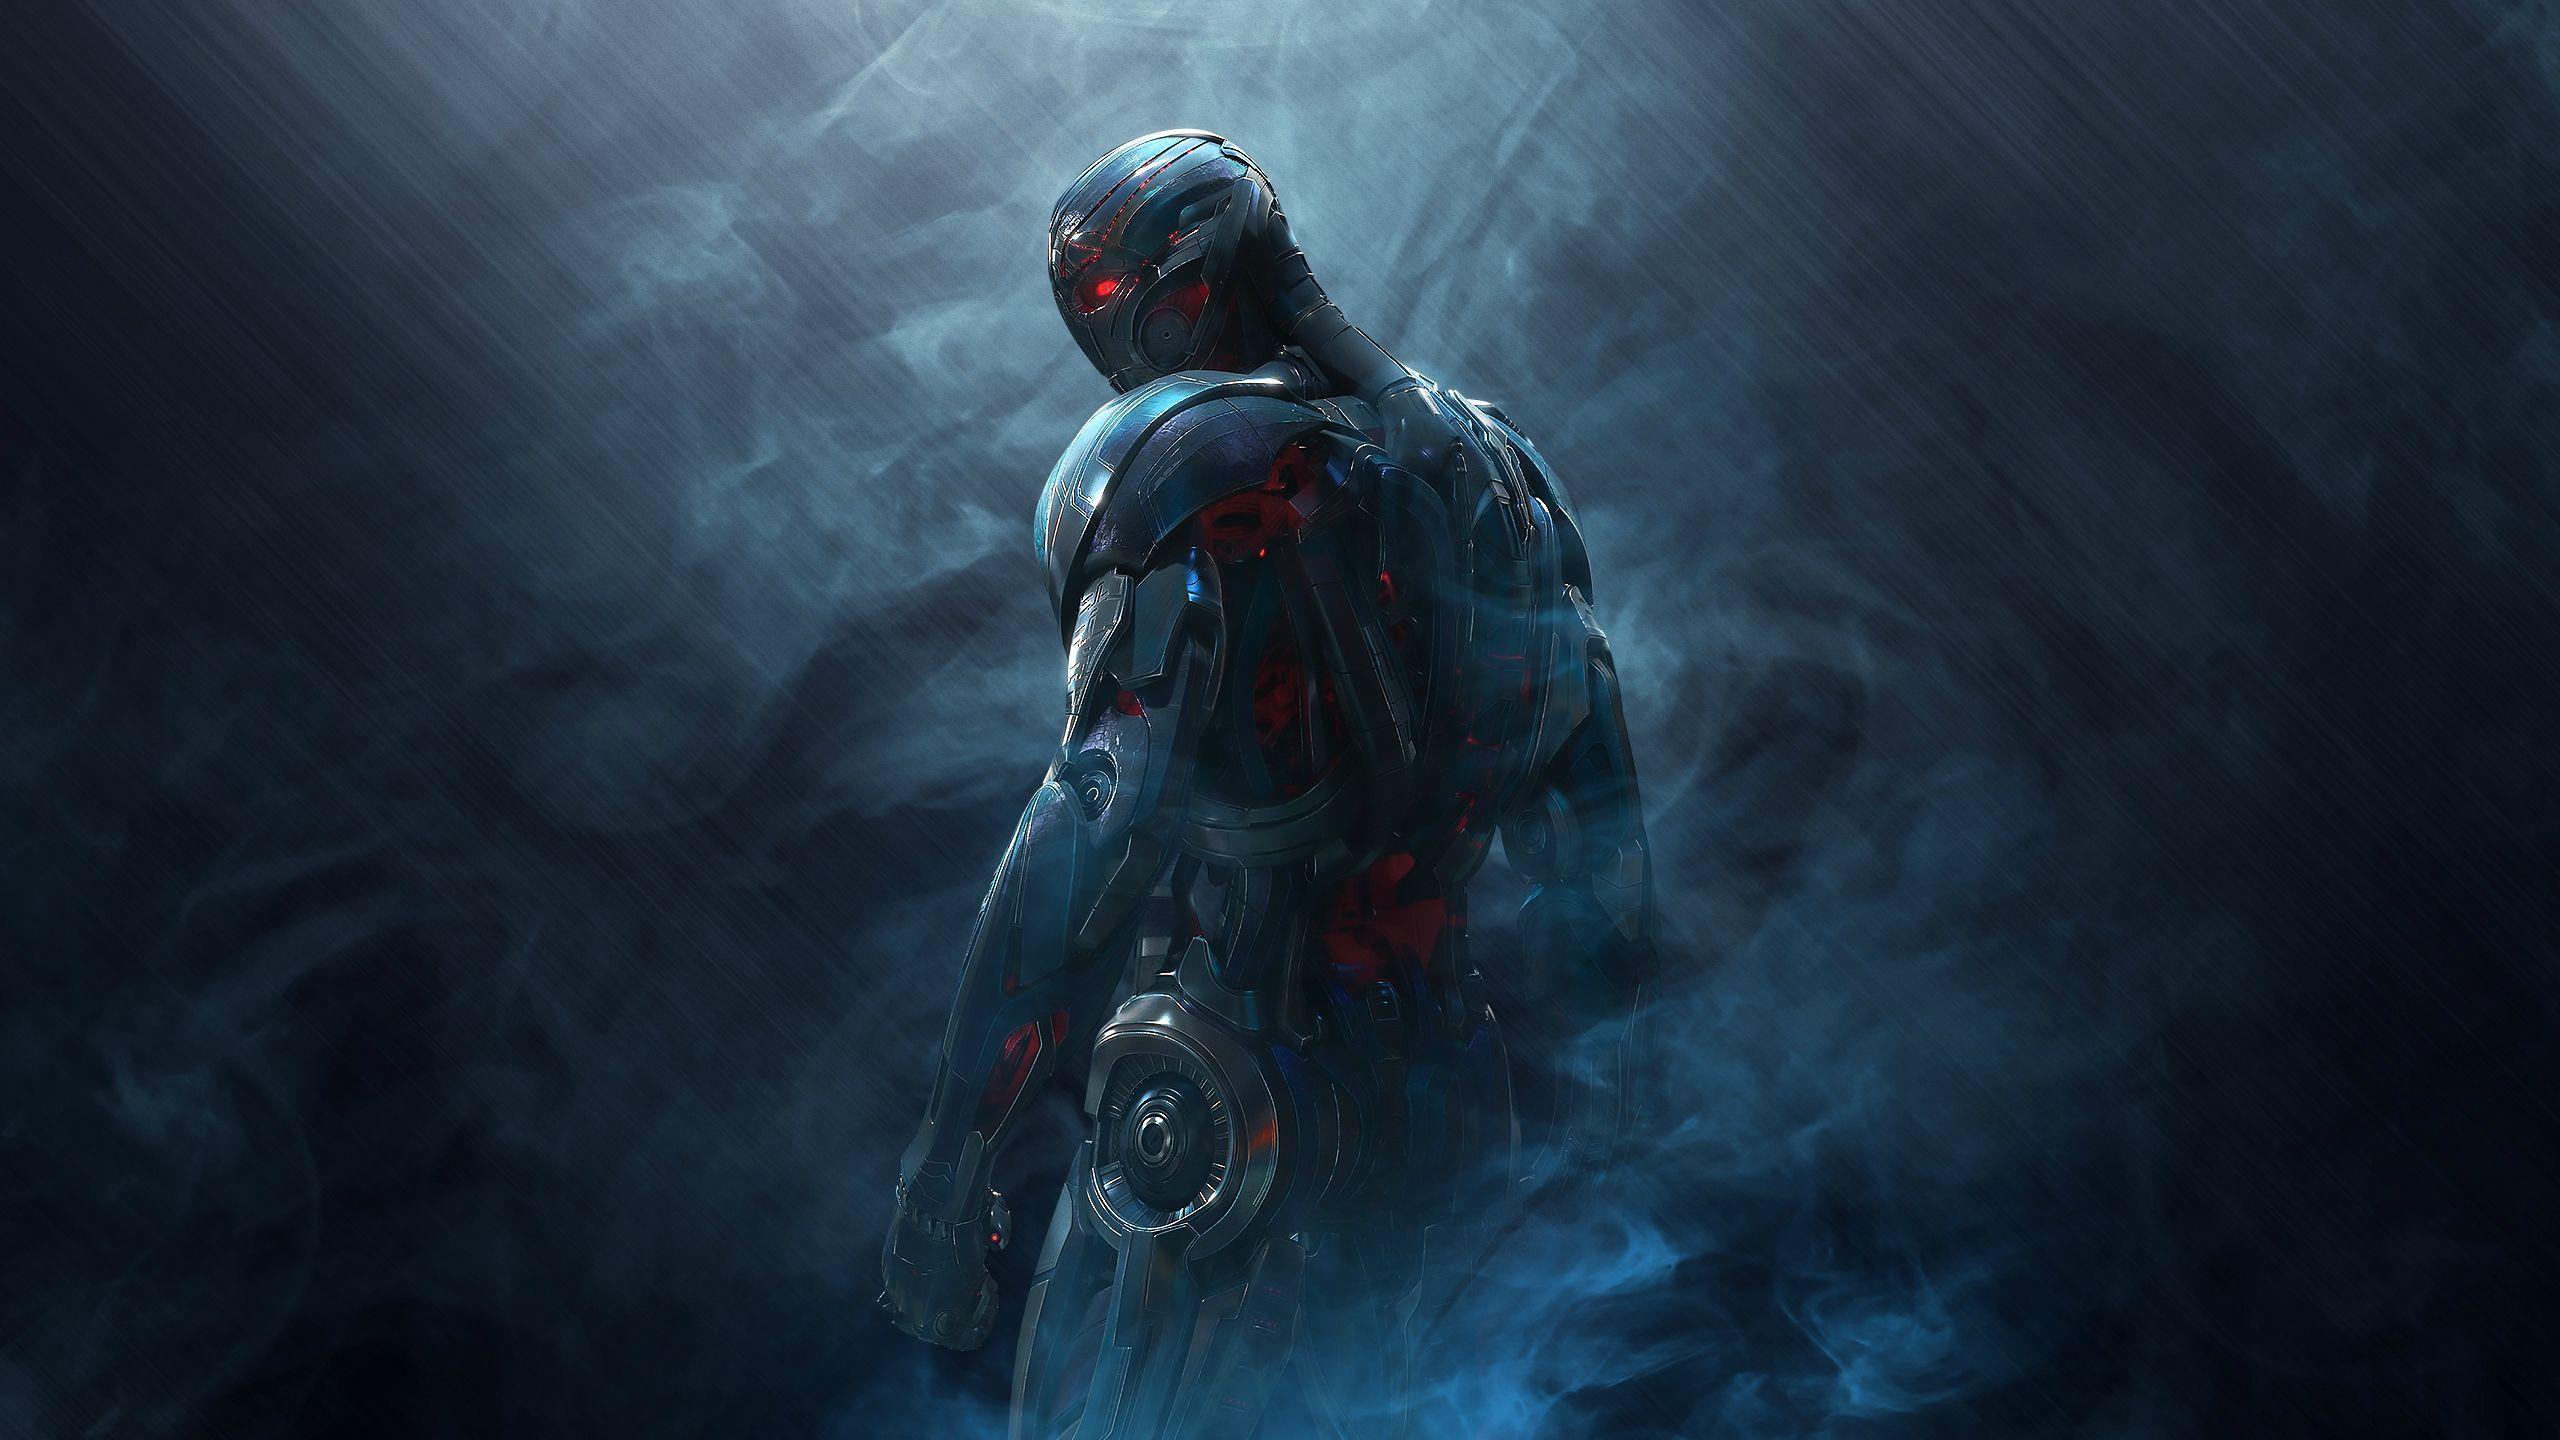 Download Wallpaper 2560x1440 Ultron, Avengers age of ultron